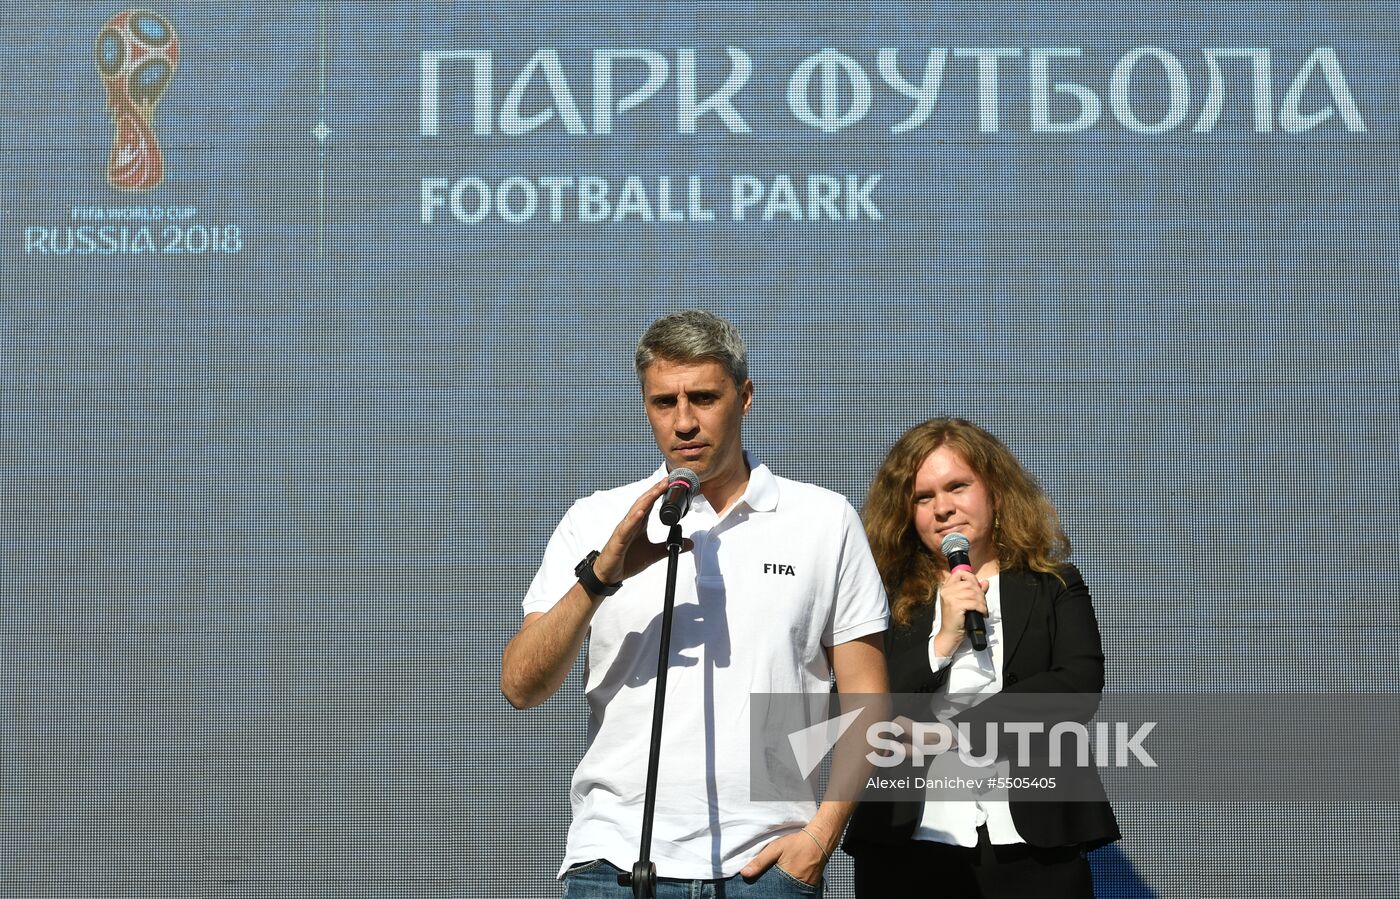 2018 FIFA World Cup Football Park in St. Petersburg